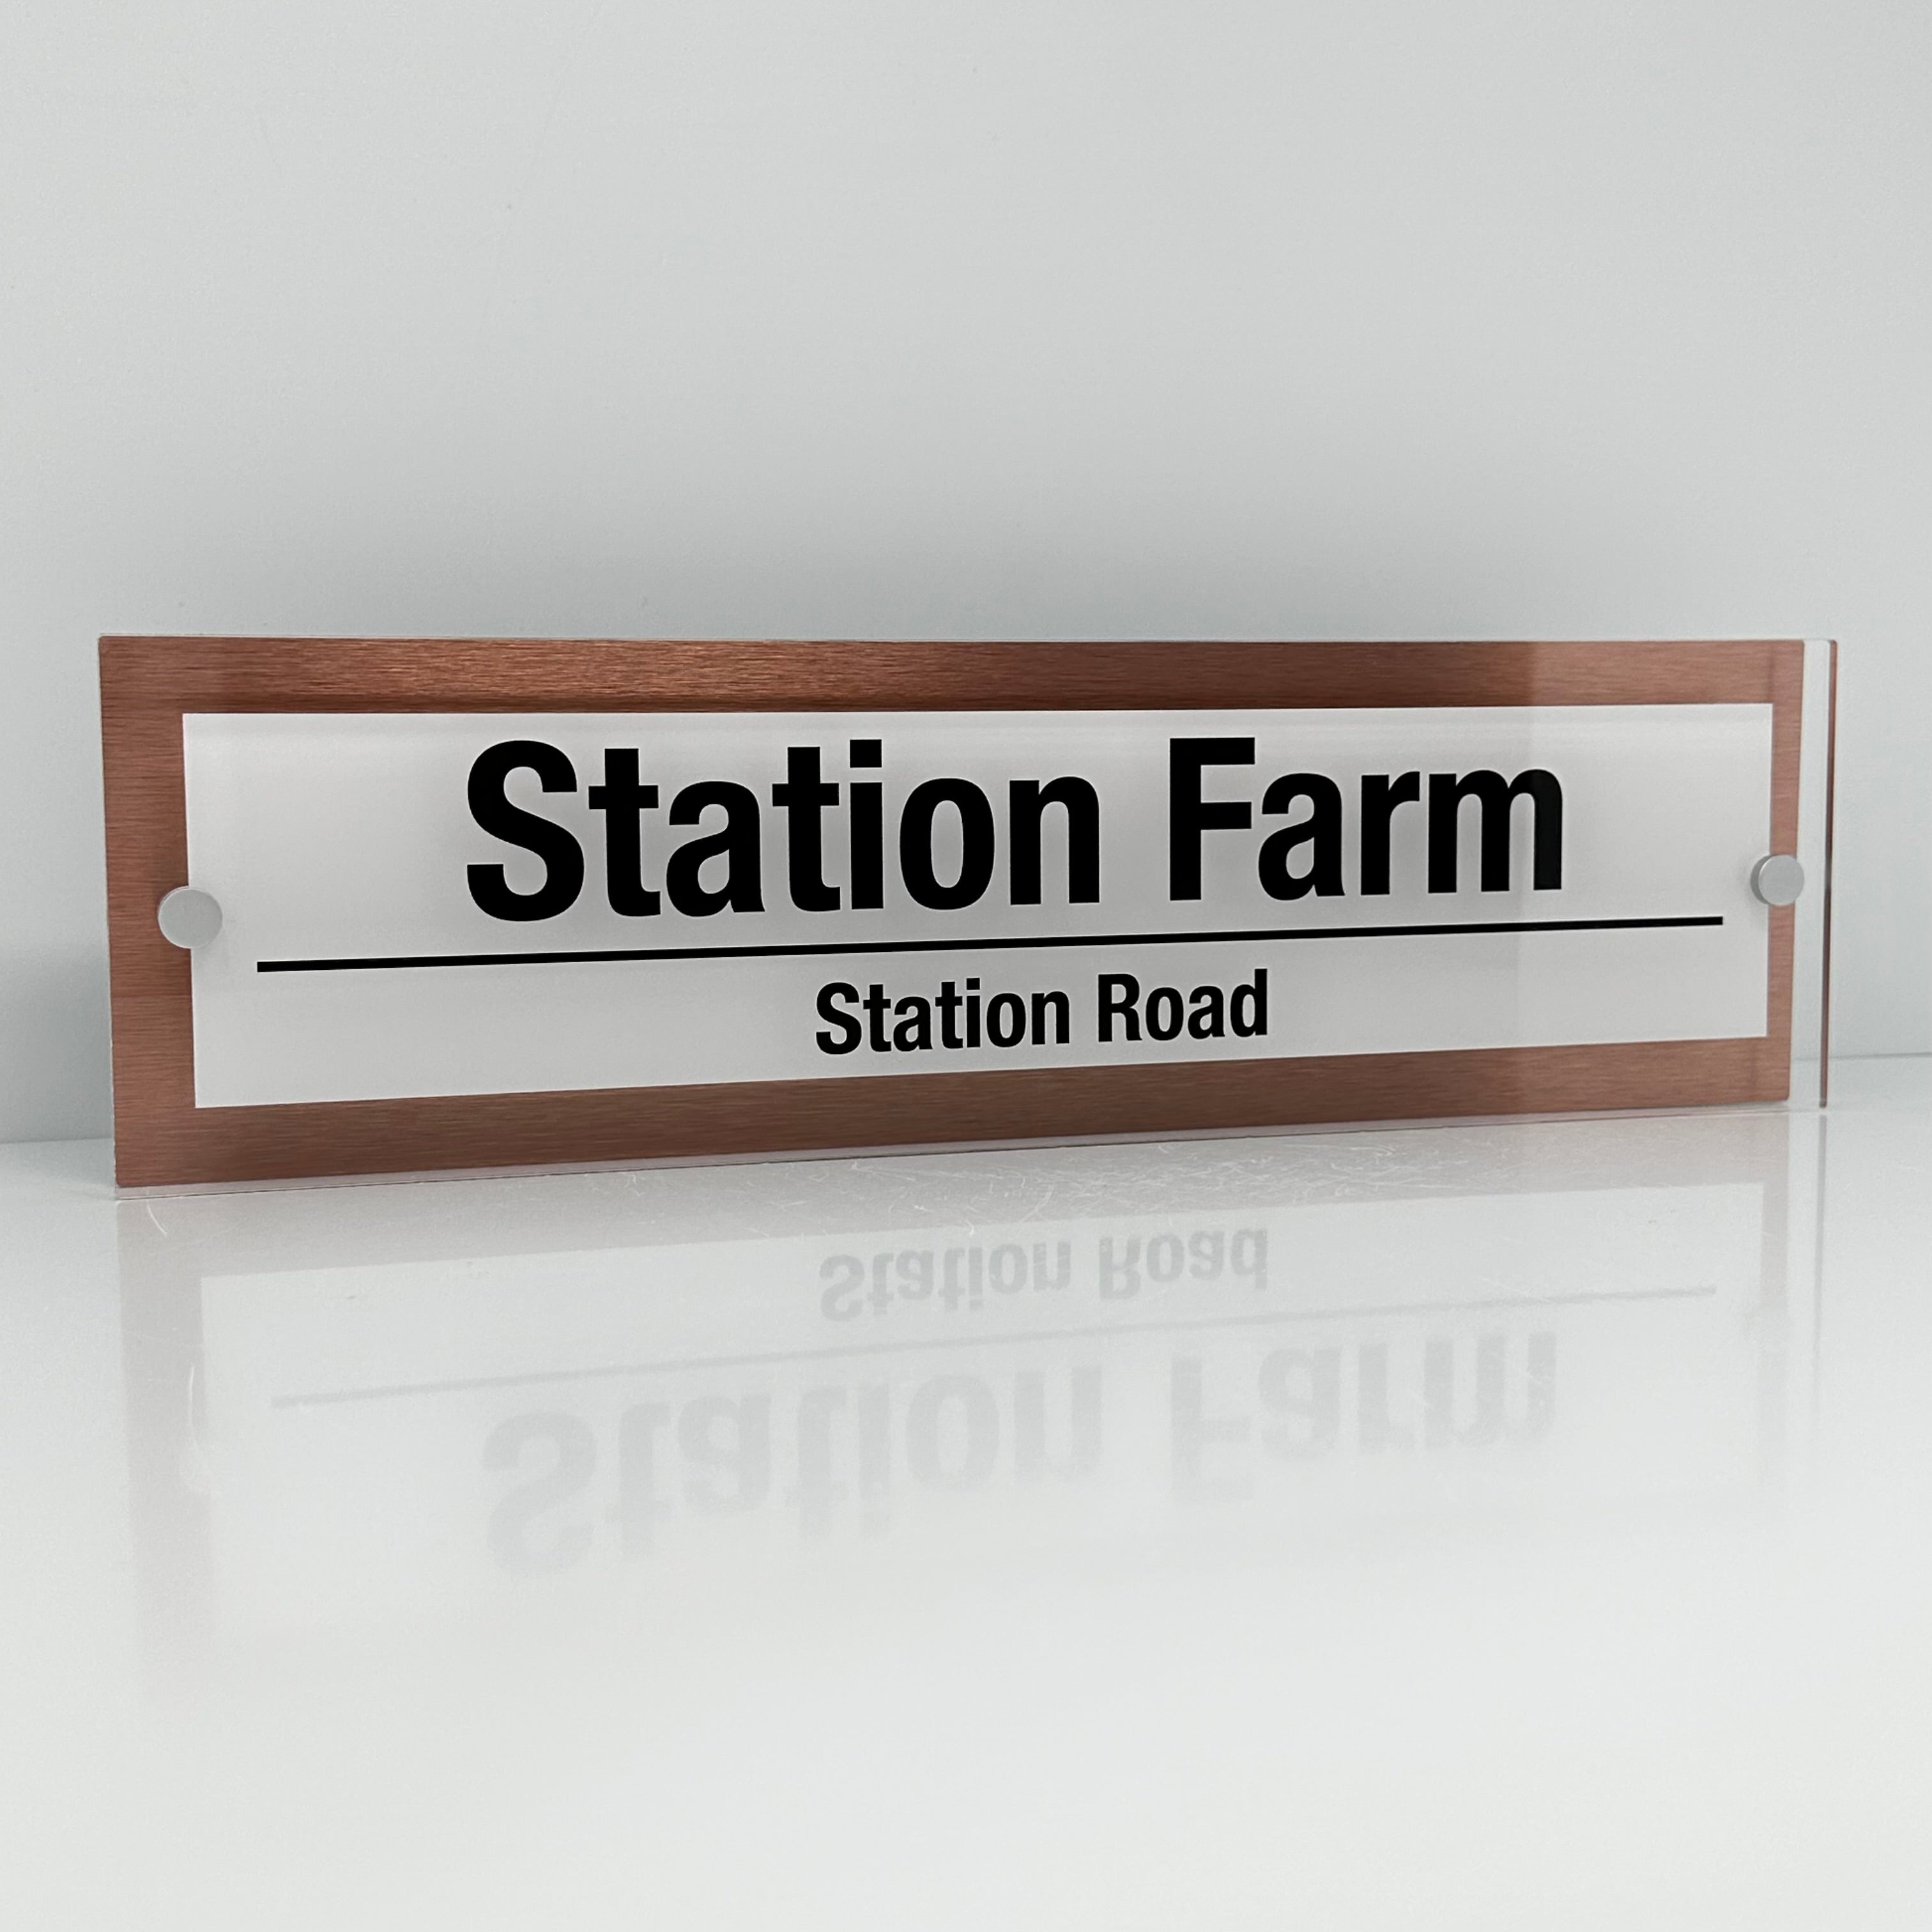 The Station Farm Modern House Sign with Perspex Acrylic Front, Copper Rear Panel and Satin Silver Stand Off Fixings ( Size - 42cm x 12cm - WHITE BACKGROUND BLACK TEXT )